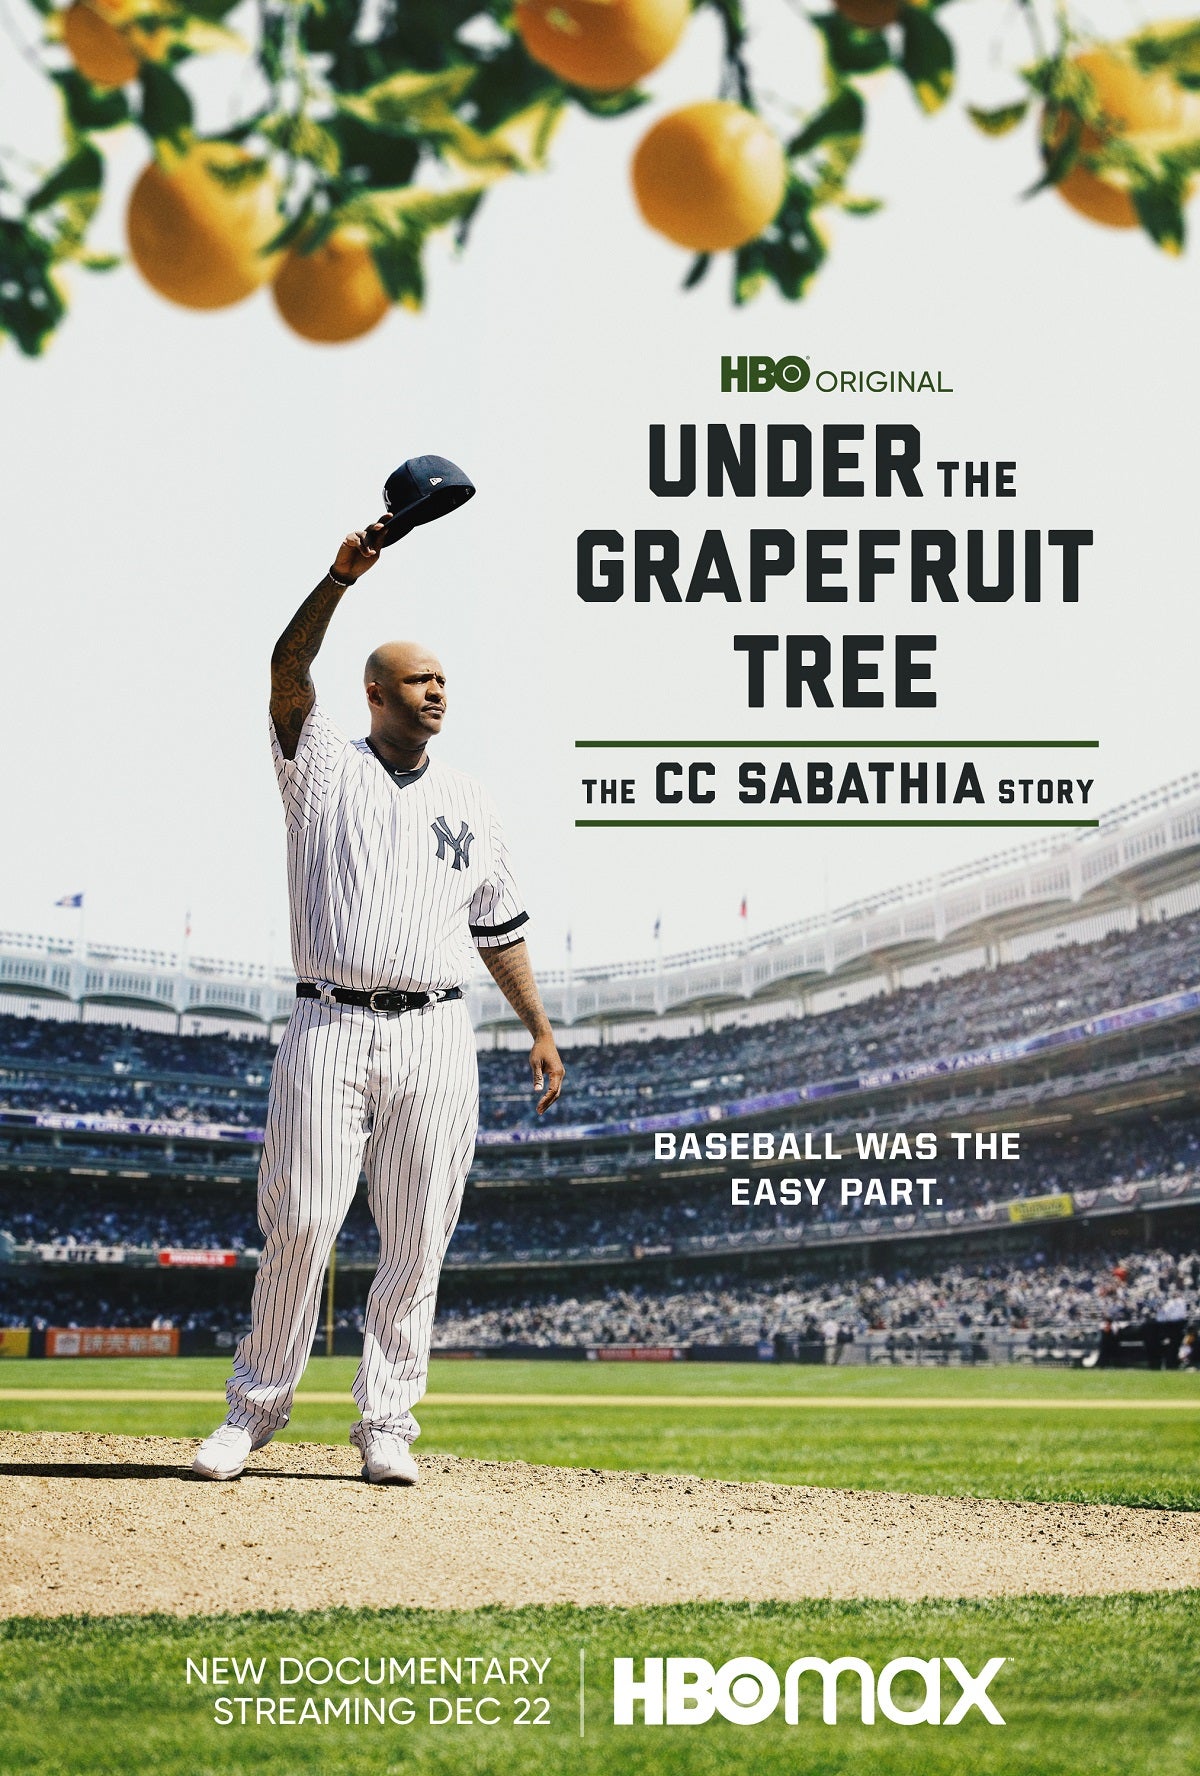 Under The Grapefruit Tree: The CC Sabathia Story (HBO): South Africa daily  TV audience insights for smarter content decisions - Parrot Analytics